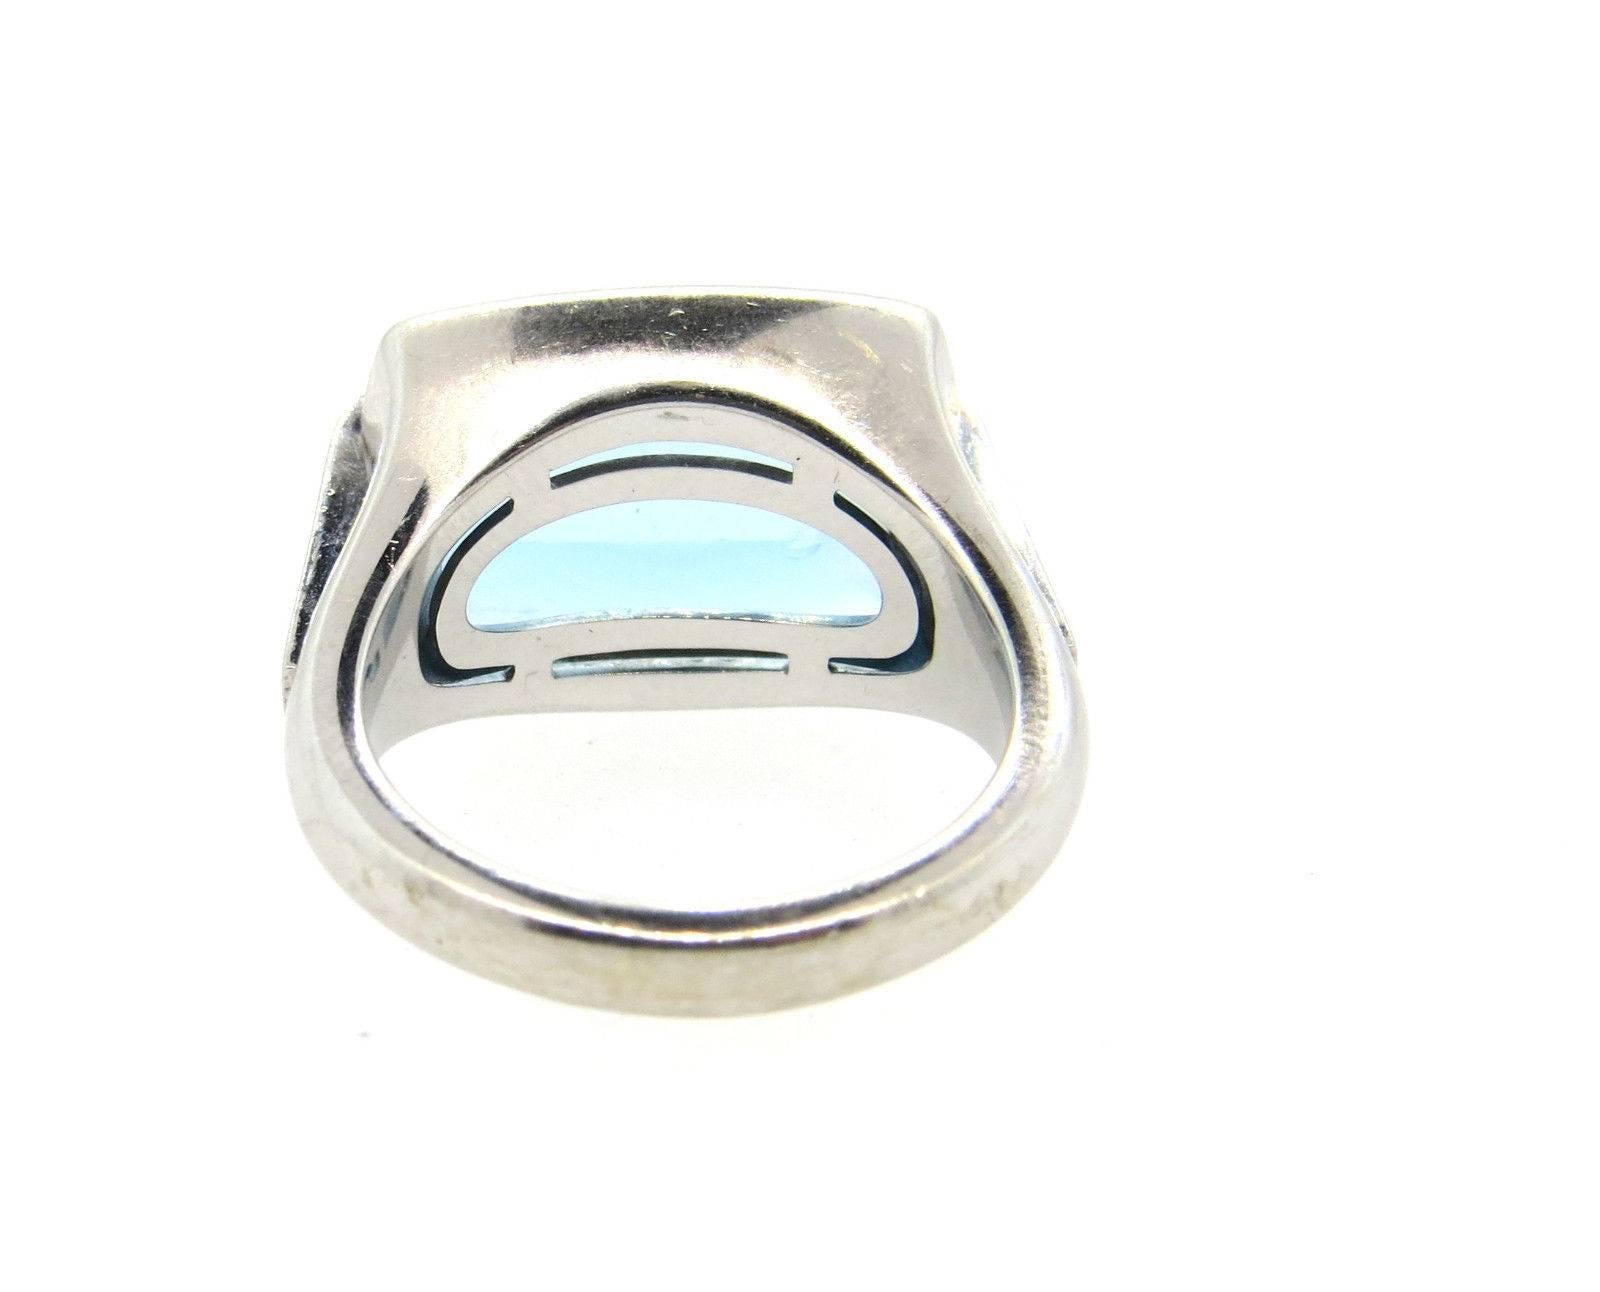 18k white gold ring, crafted by Bulgari, set with blue topaz as a centerpiece. Ring size 7.5, top measures 19.5mm x 14.1mm. Marked Blvgari and 750. Weight of the piece - 13.8 grams